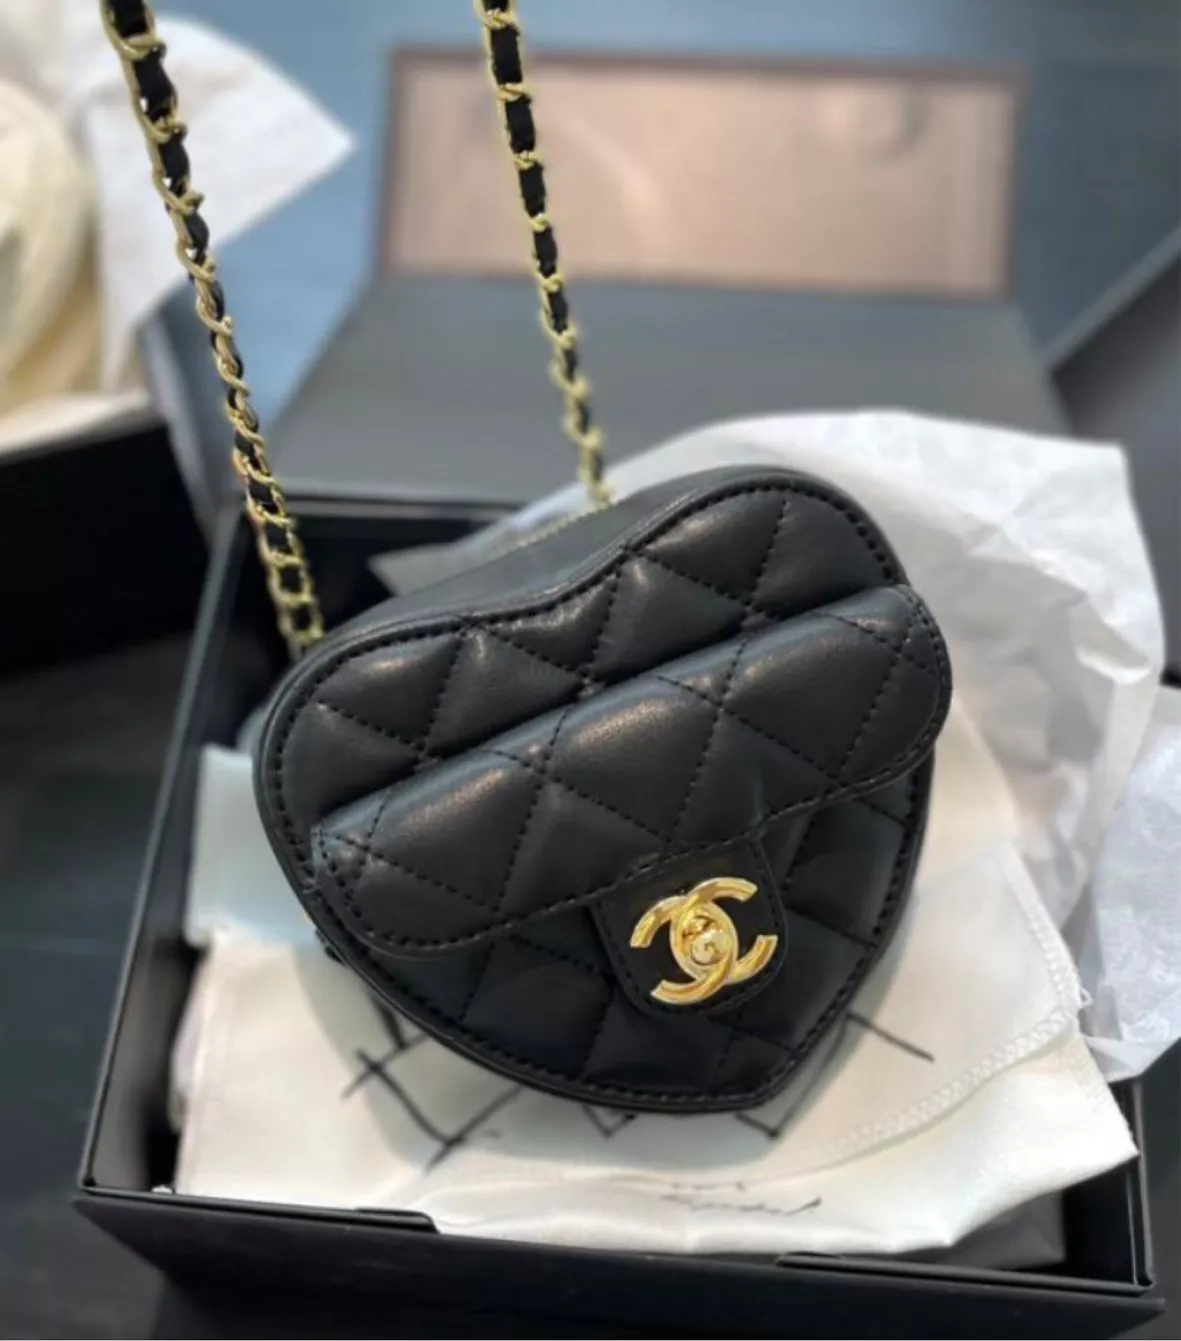 chanel backpack dhgate